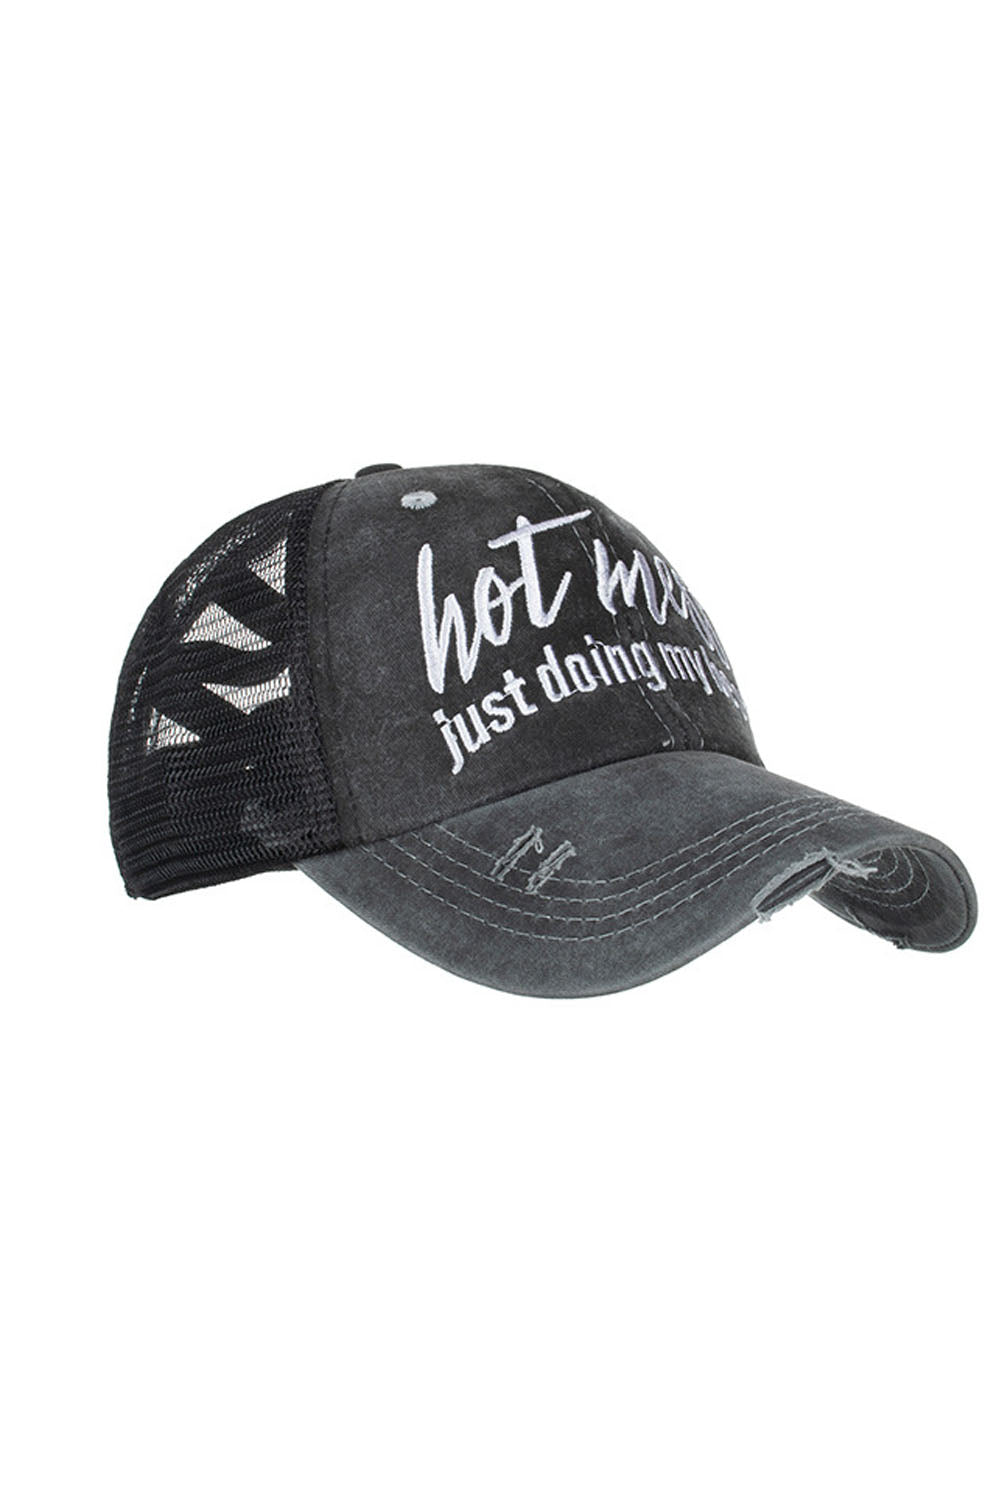 Hot Mess Doing My Best Embroidered Mesh Baseball Cap Hats & Caps JT's Designer Fashion